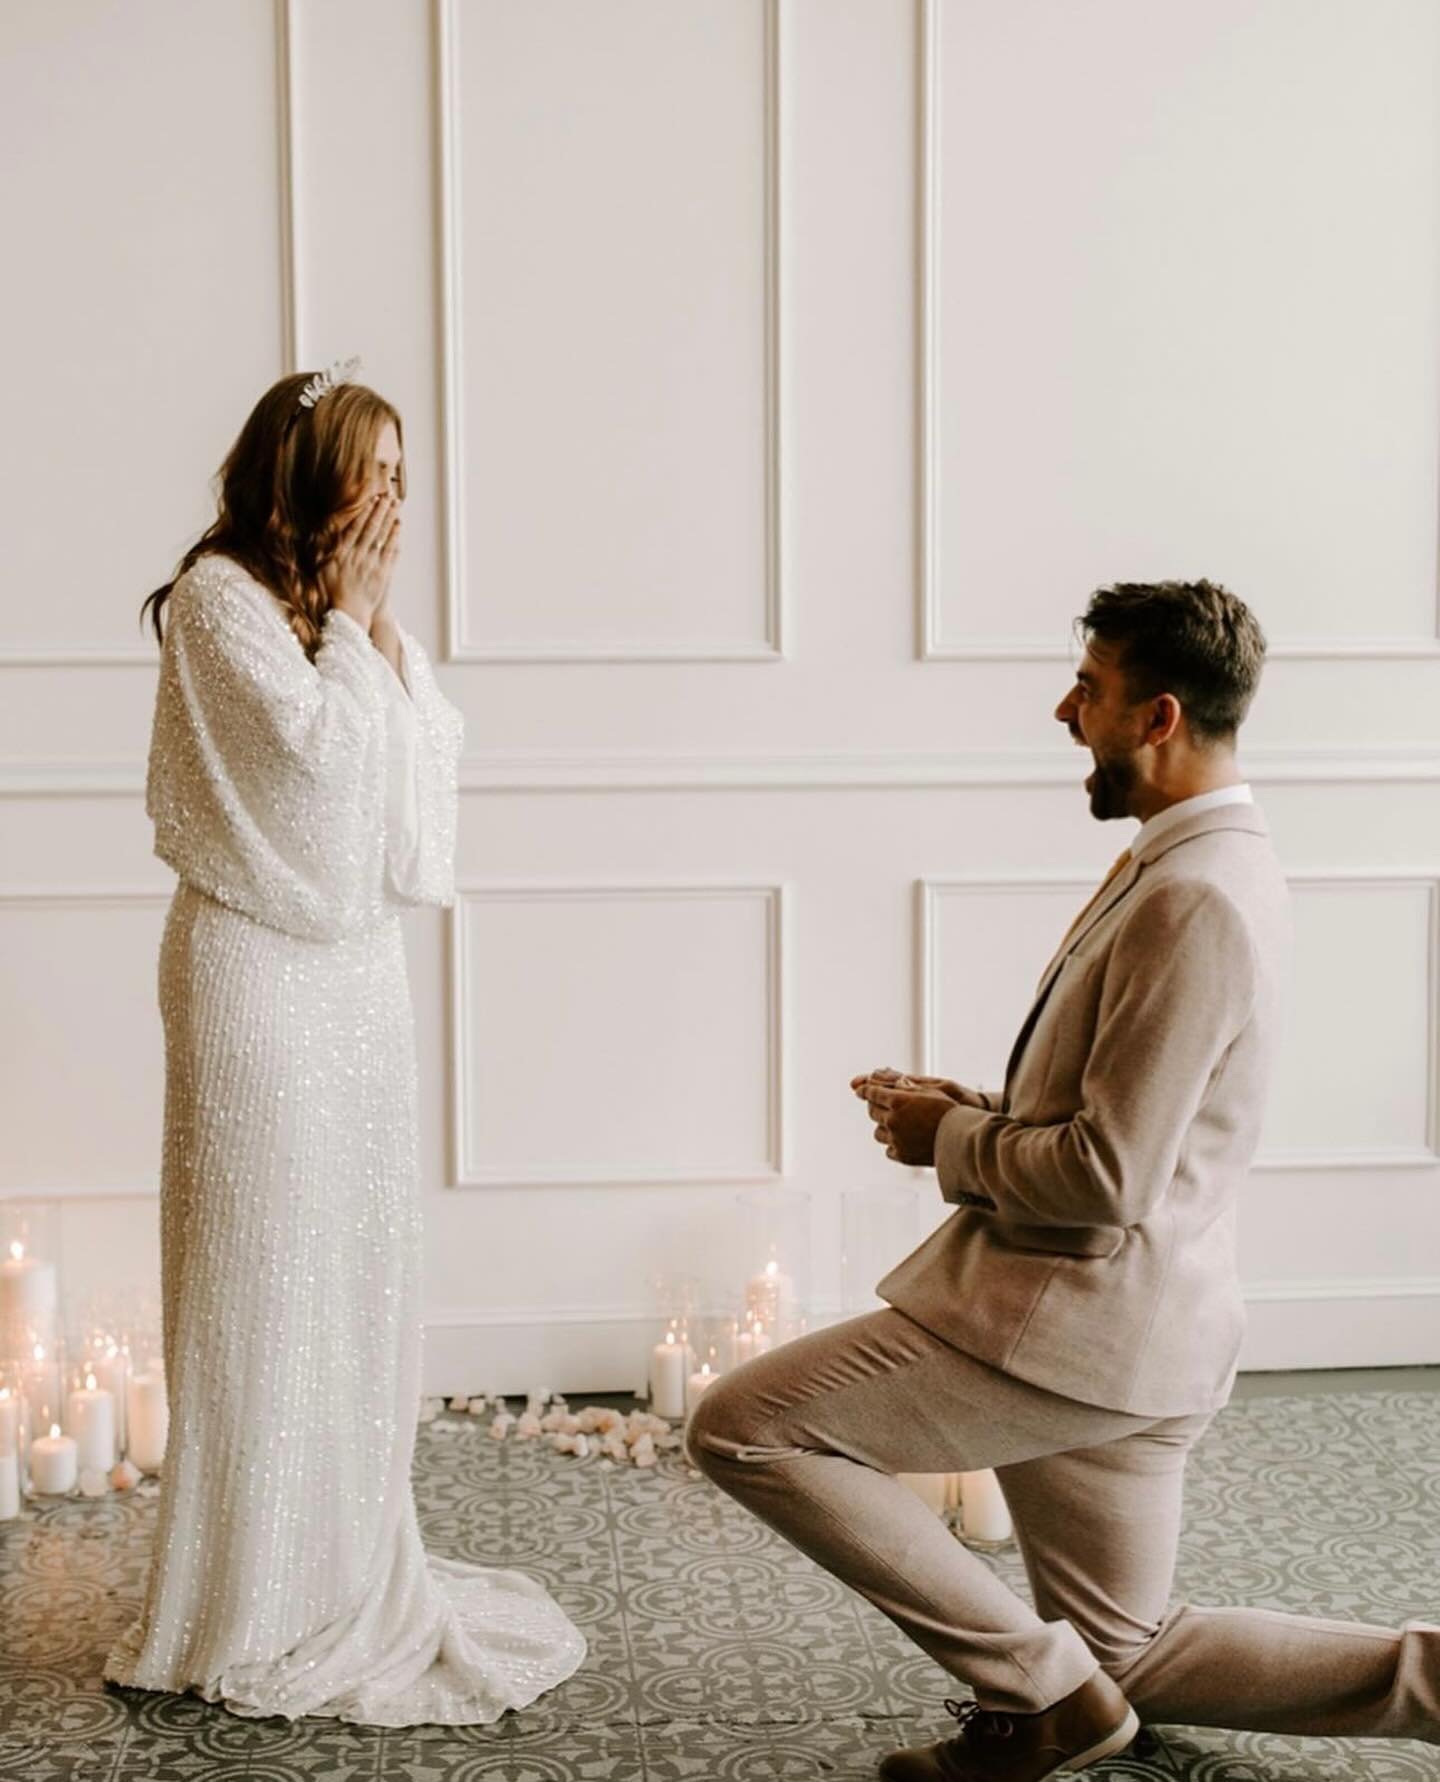 Weve seen our share of surprise proposals, and we&rsquo;re not about to pick a favorite, but this one (that began as a styled shoot!!) really took our breath away!
Thinking of popping the big question? DM us to find out how we can bring your moment t